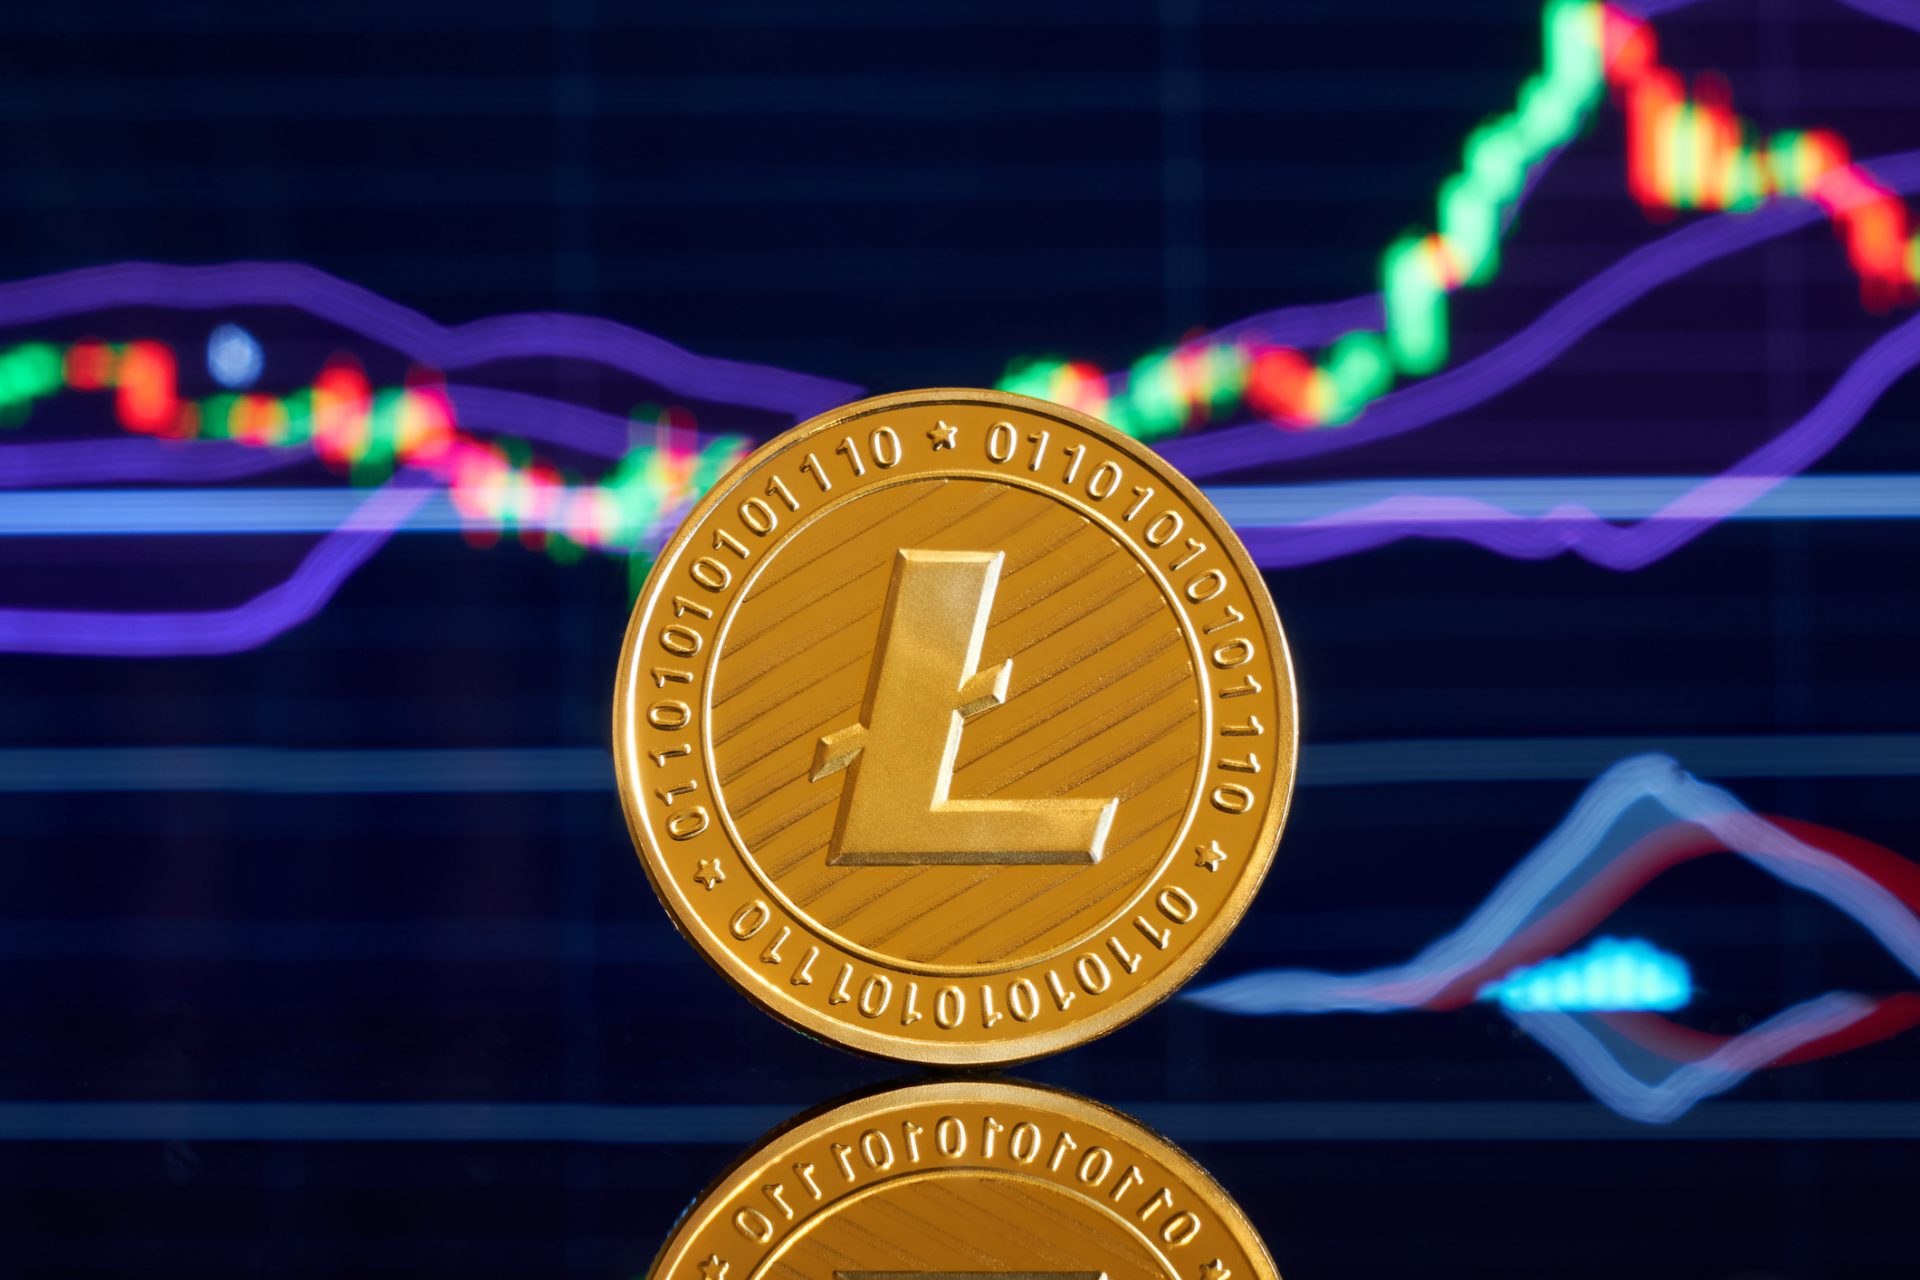 Gold coin litecoin on a bright background of business graphics close-up.